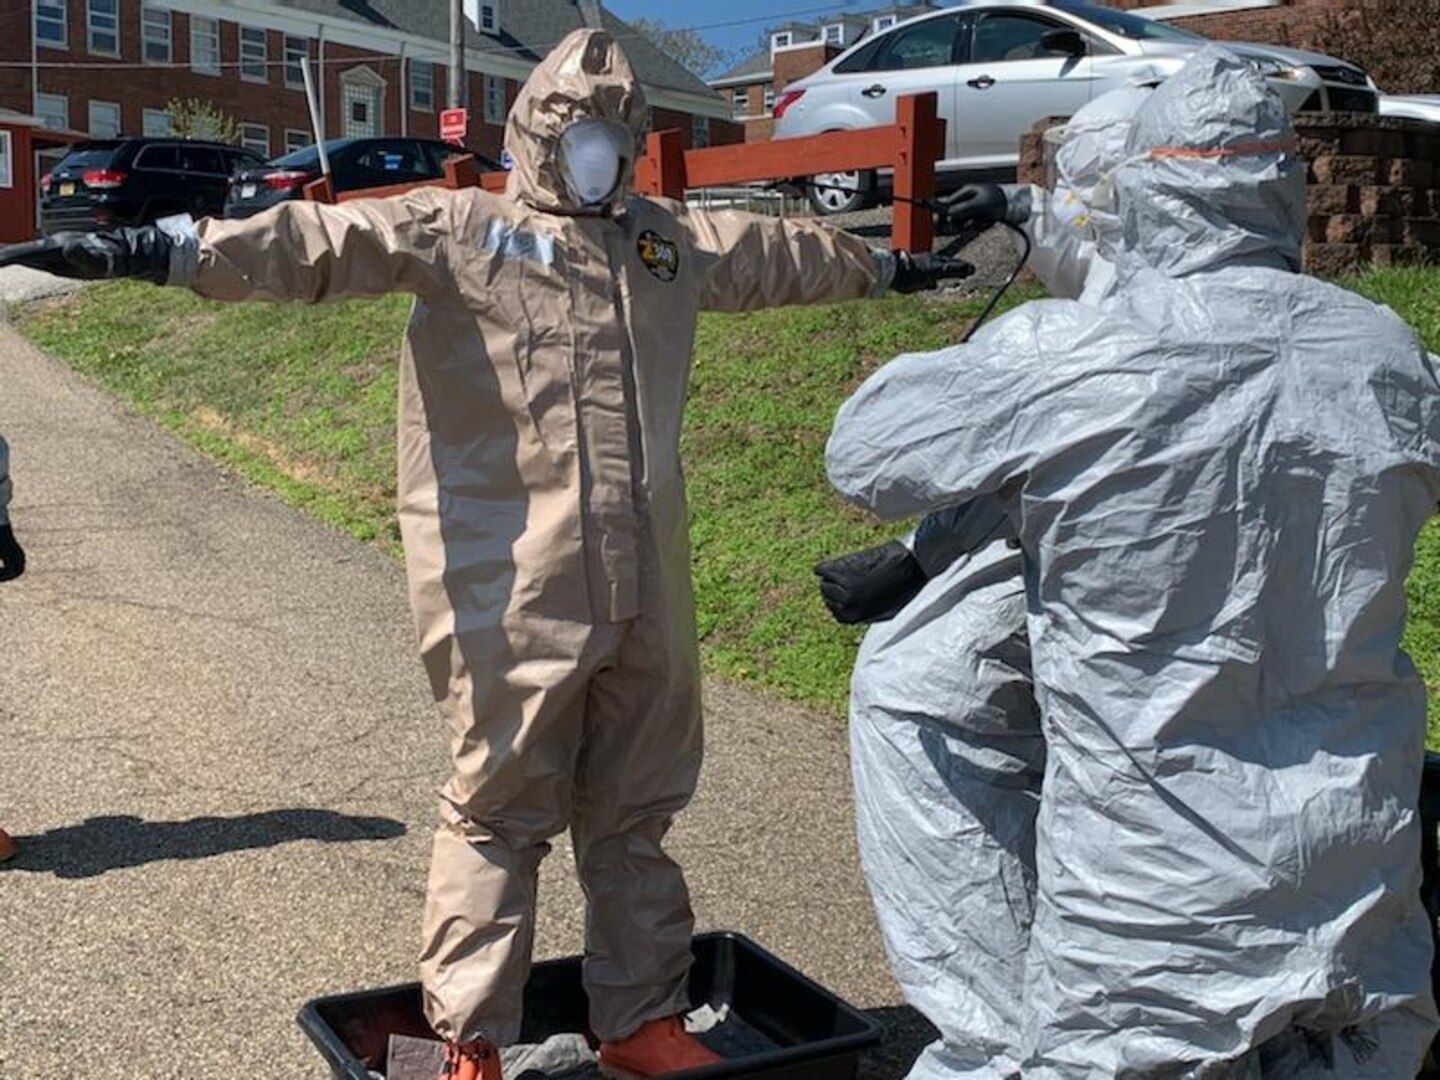 A member of the West Virginia National Guard Task Force CRE undergoes decontamination following COVID-19 testing at a veterans home facility April 20, 2020. The West Virginia National Guard conducted COVID-19 testing at two veterans home facilities in Barboursville and Clarksburg totaling 411 patients and staff following an executive order issued by Governor Jim Justice to test all nursing home facilities in the state. (West Virginia National Guard photo)